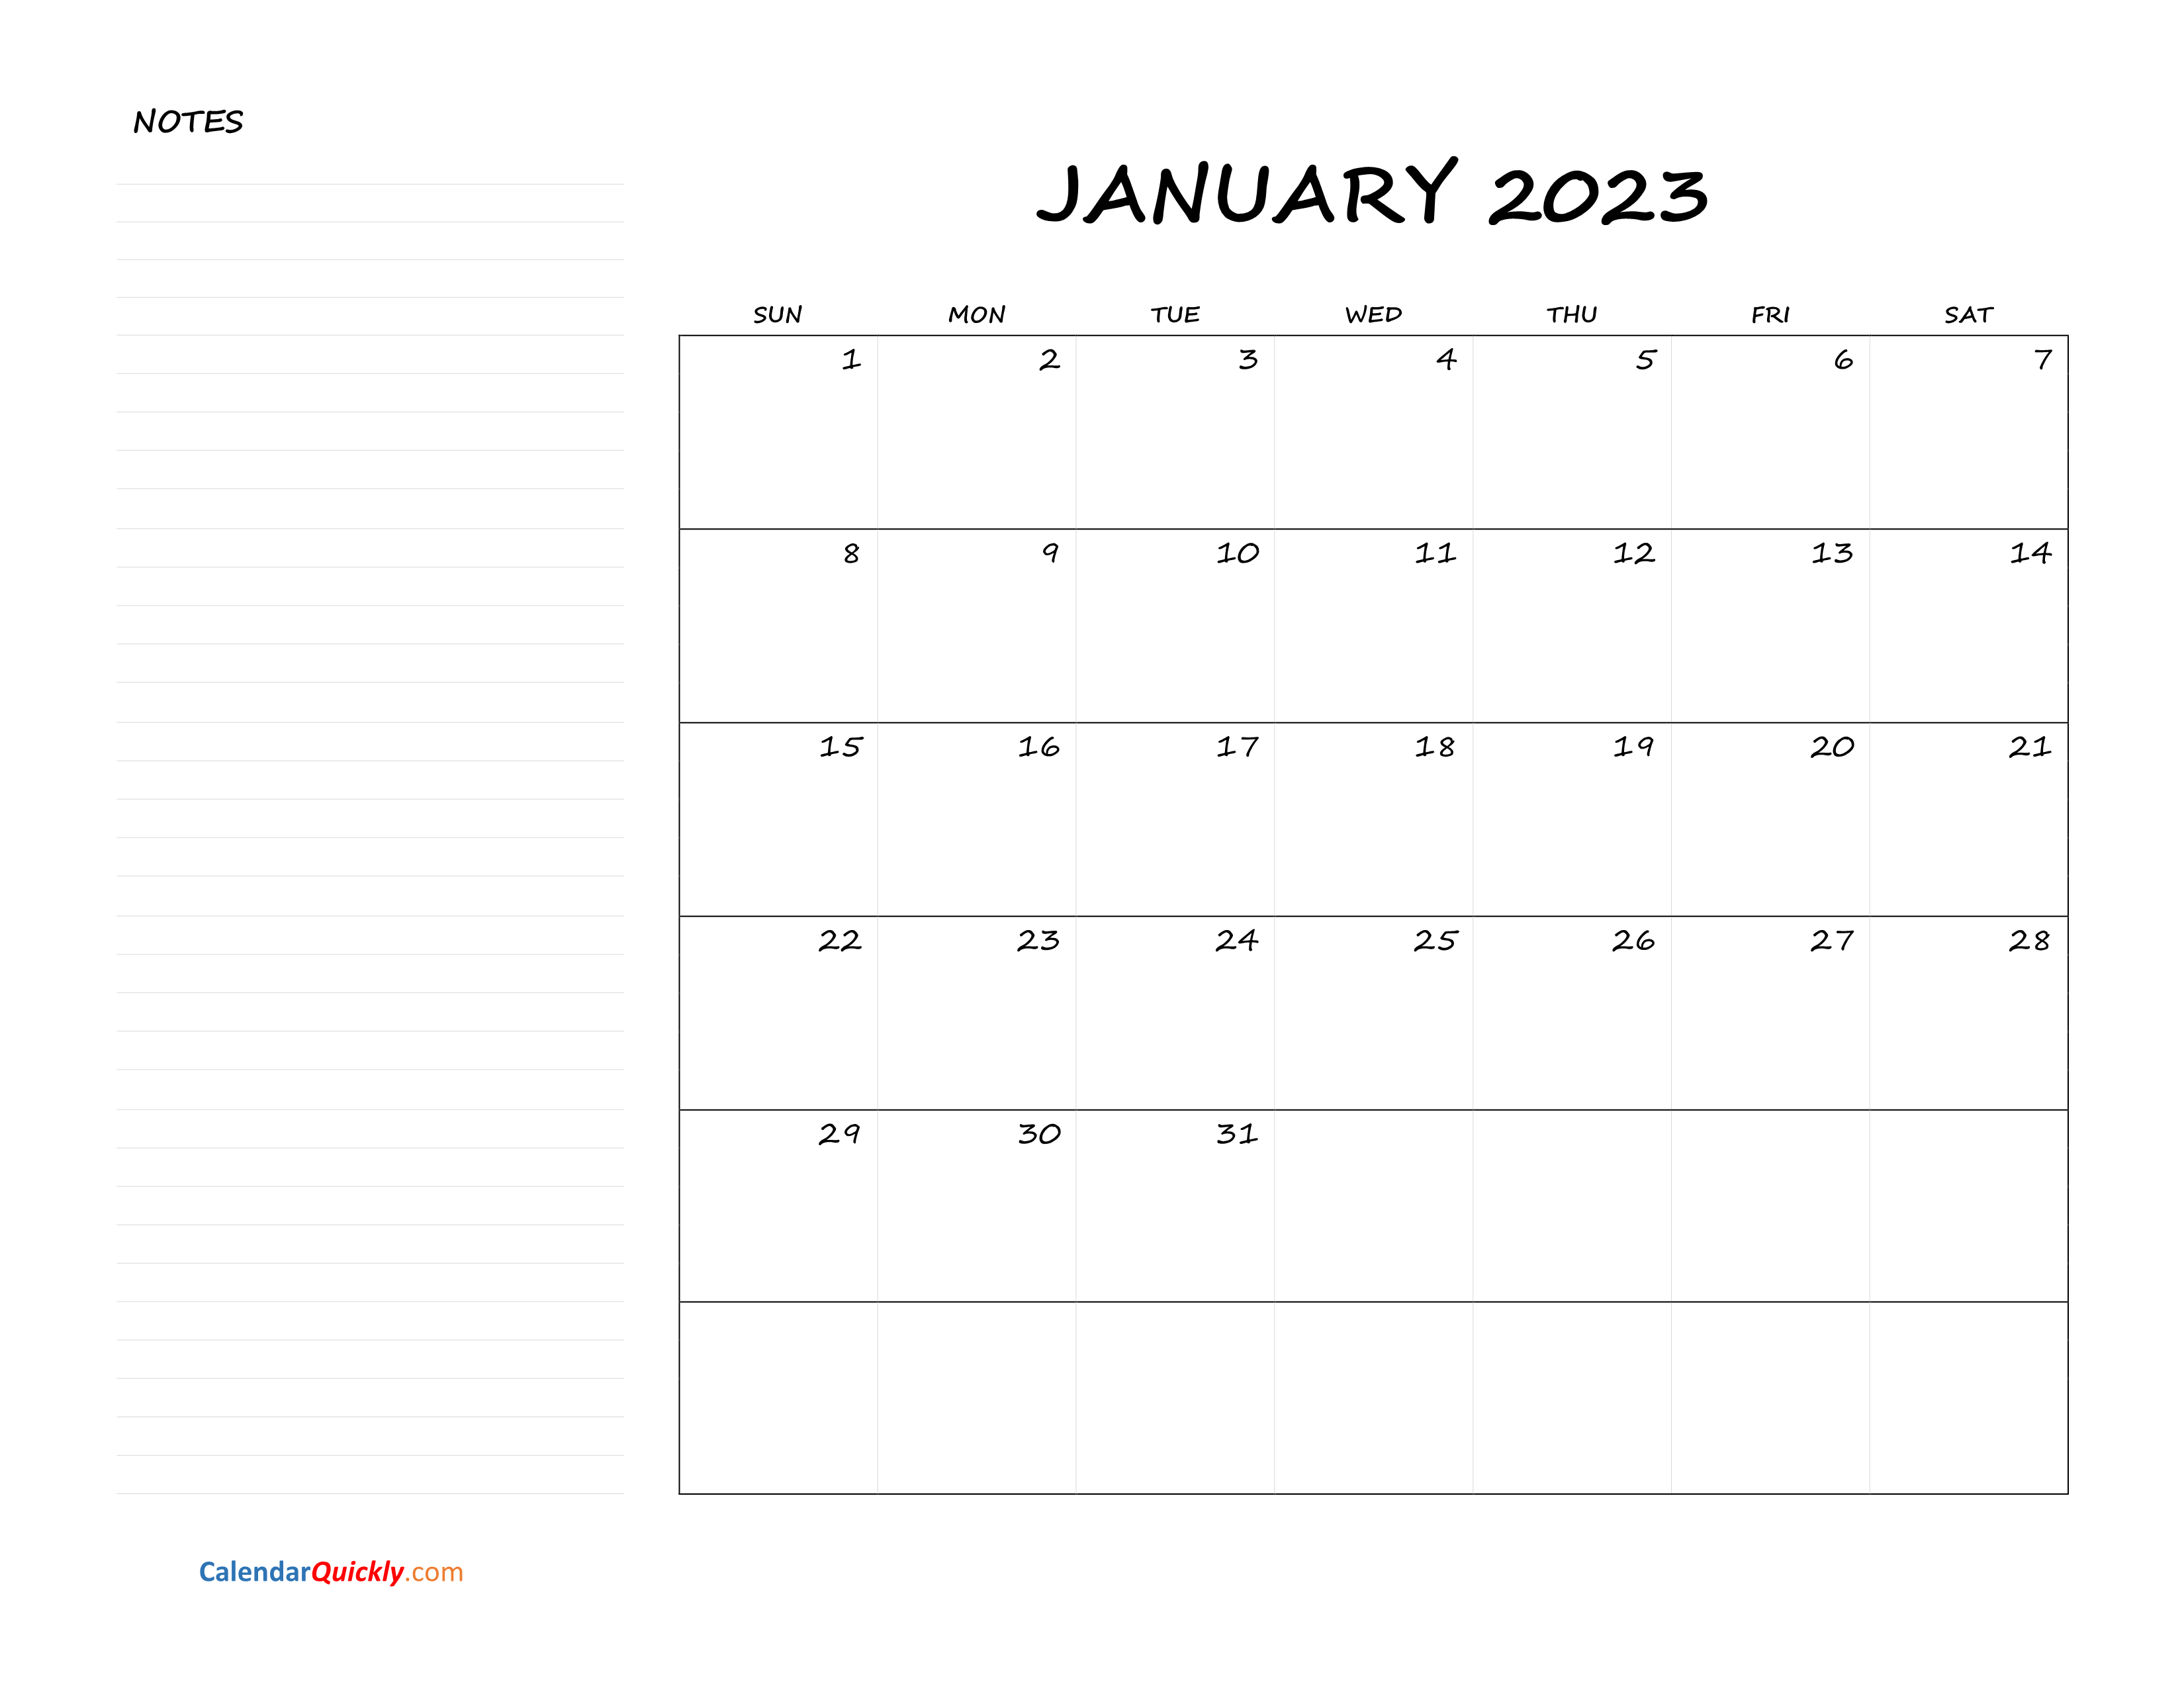 Monthly Blank Calendar 2023 with Notes | Calendar Quickly